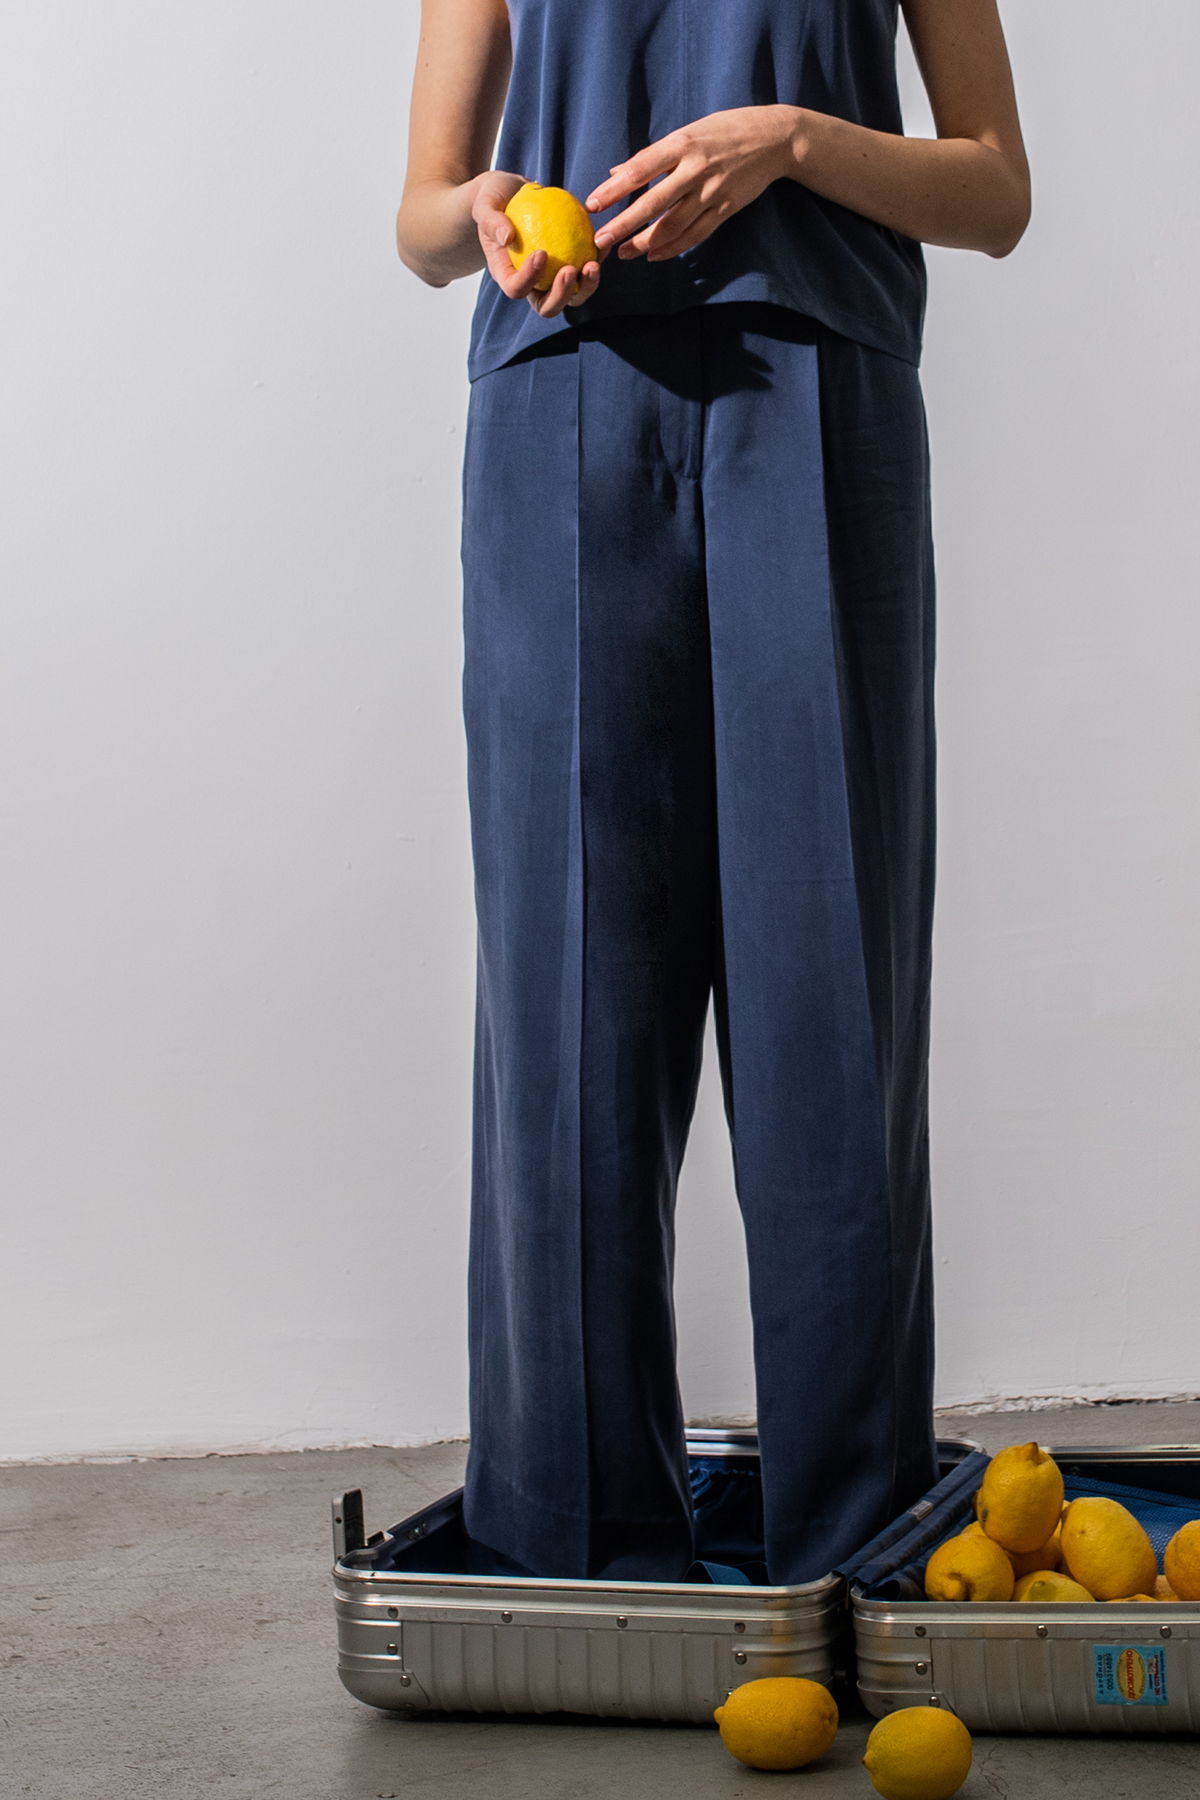 02/2 High Waisted Pants Navy detail - hello'ben store